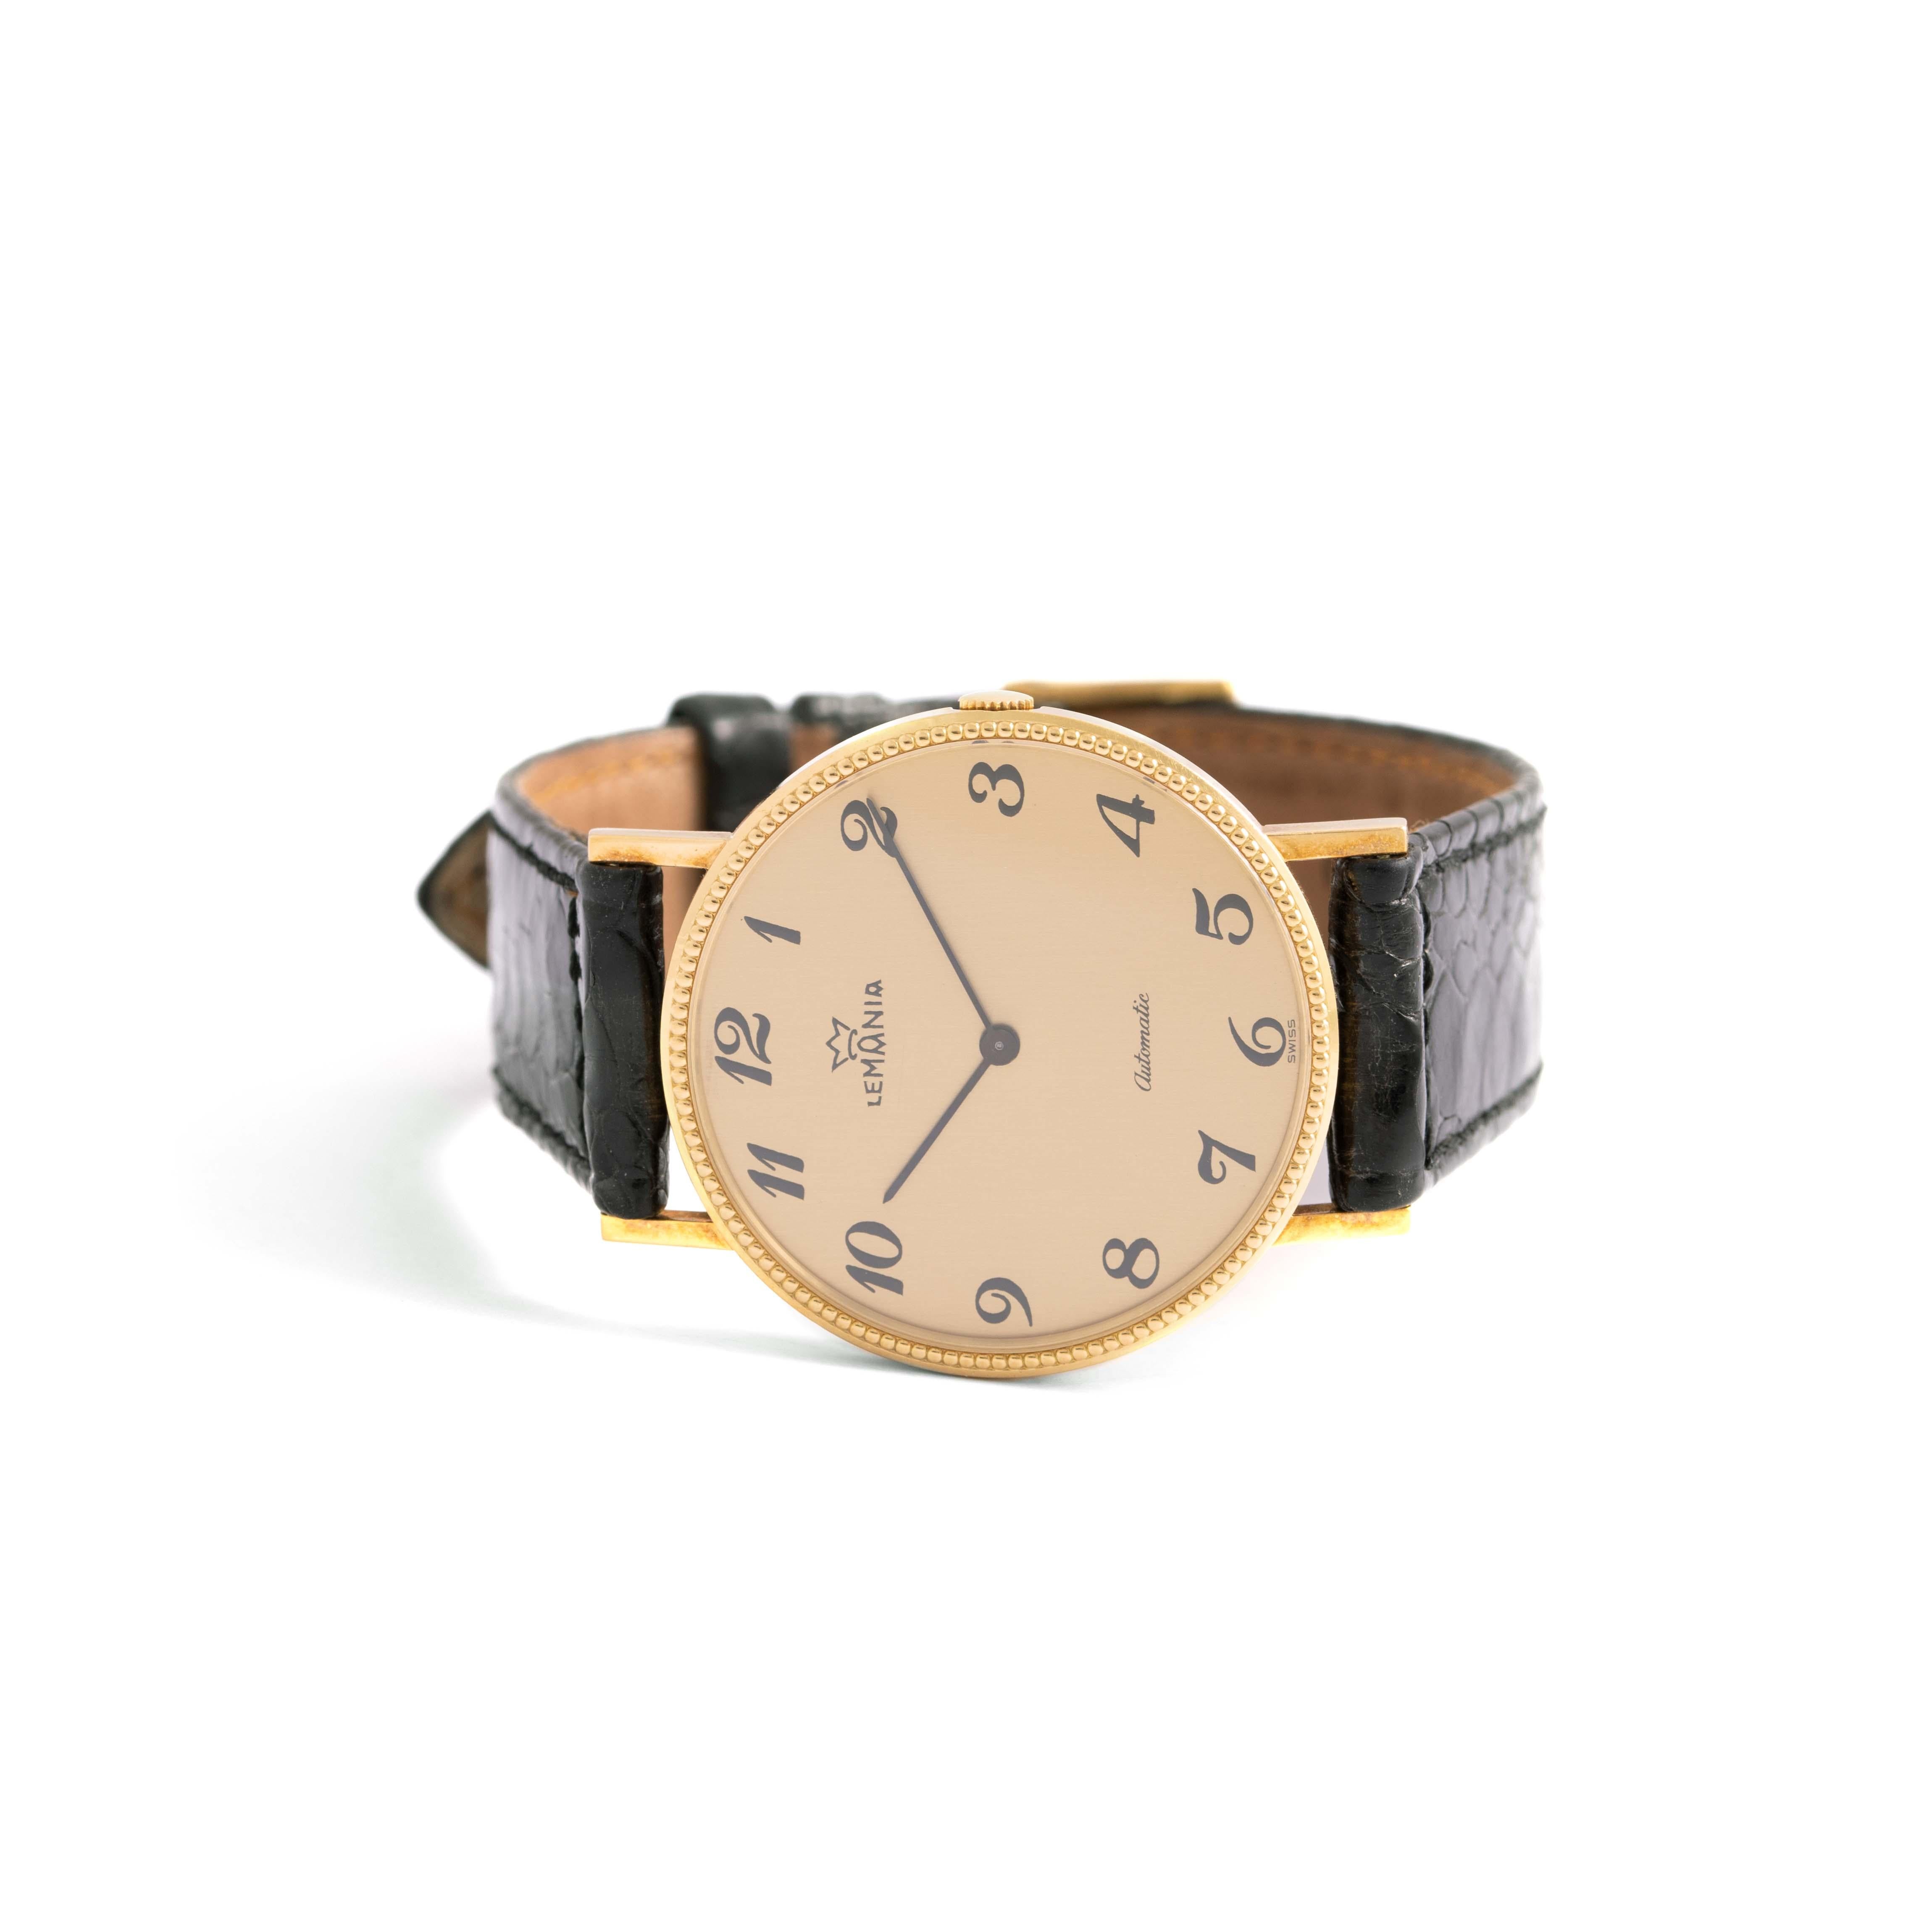 Lemania 18K yellow gold wristwatch. Black leather strap. Pin buckle. Automatic movement. Signed Lemania. Numbered 18089292.
Some scratches.
We do not guarantee the movement is working.
Dimensions of the dial: 32 mm x 32 mm x 5 mm. 
Total length: 23